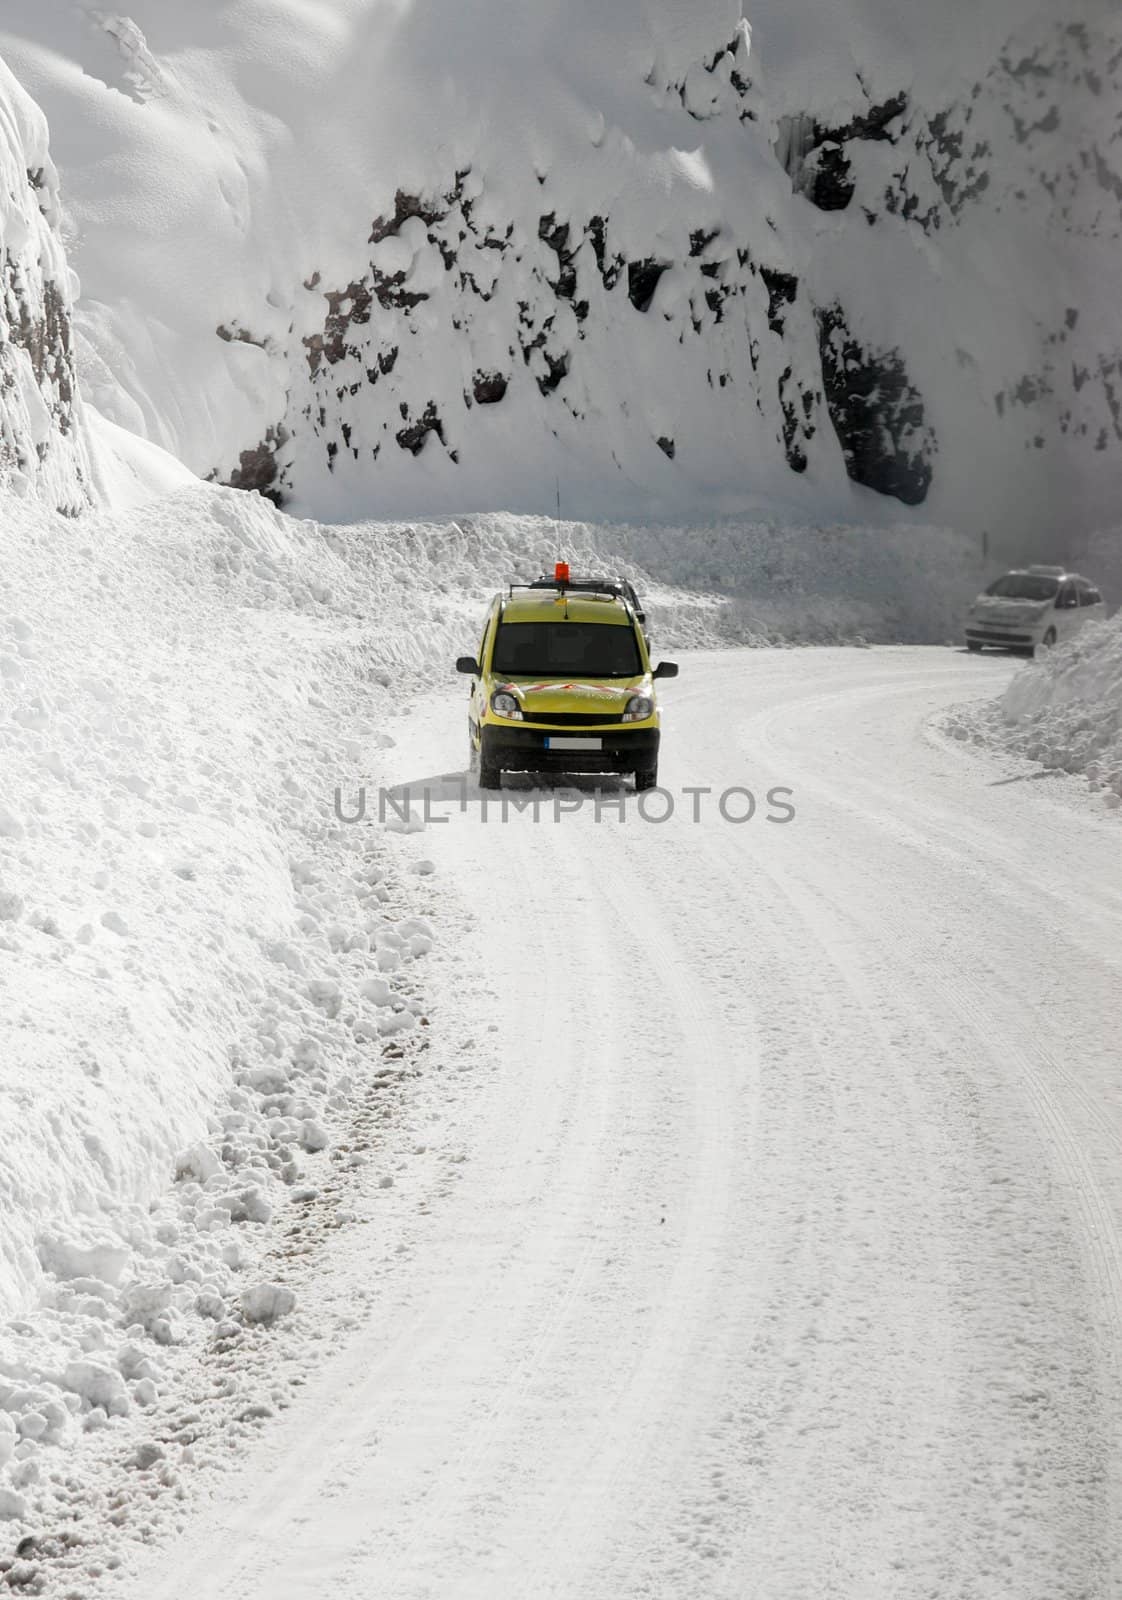 Hard driving condition on mountain road in winter